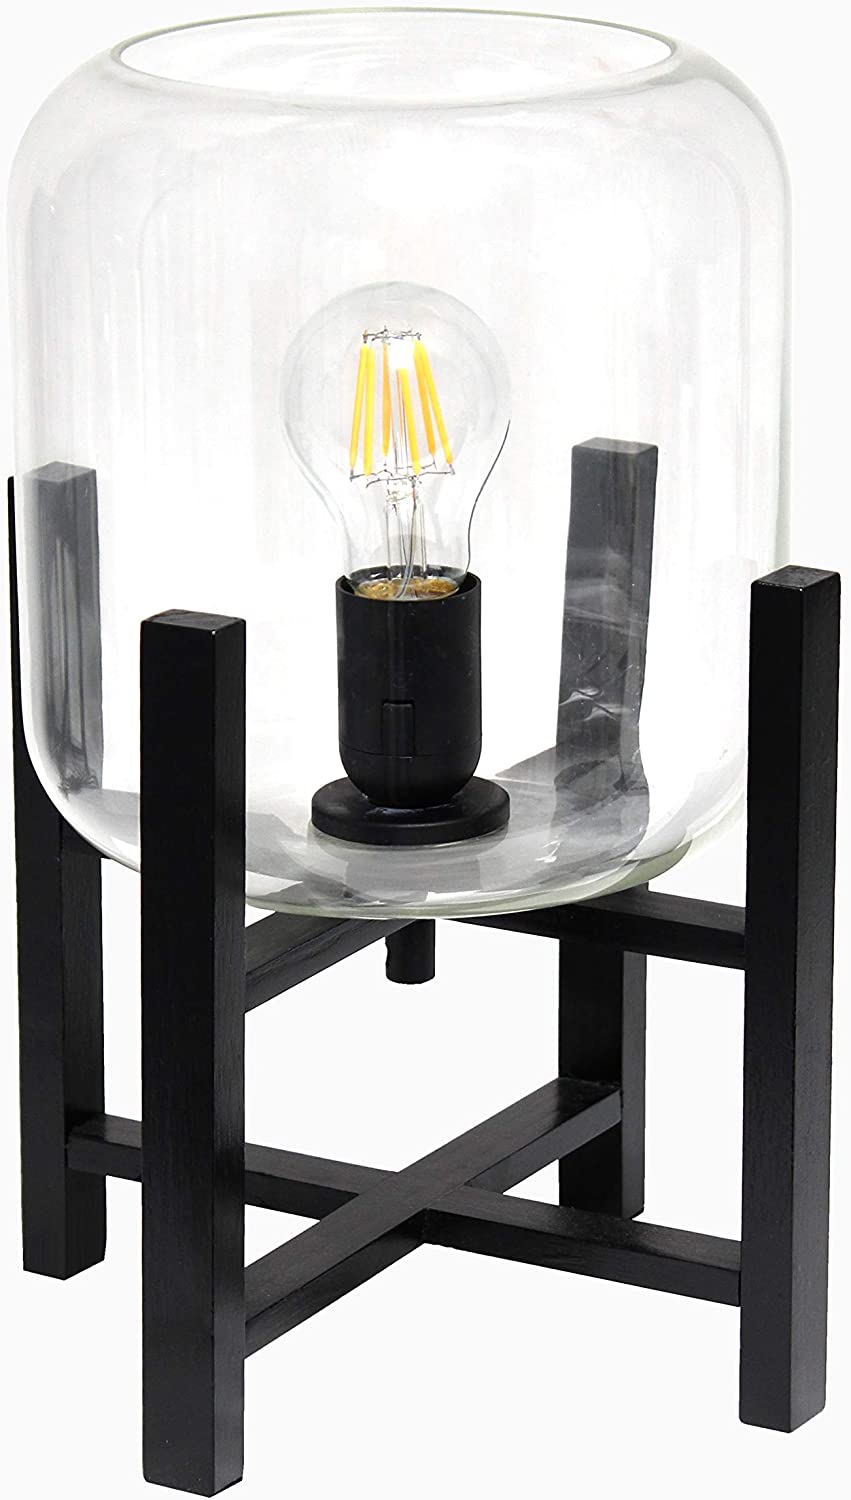 Simple Designs LT1068-CLR Wood Mounted Glass Cylinder Shade Table Lamp, Black/Clear